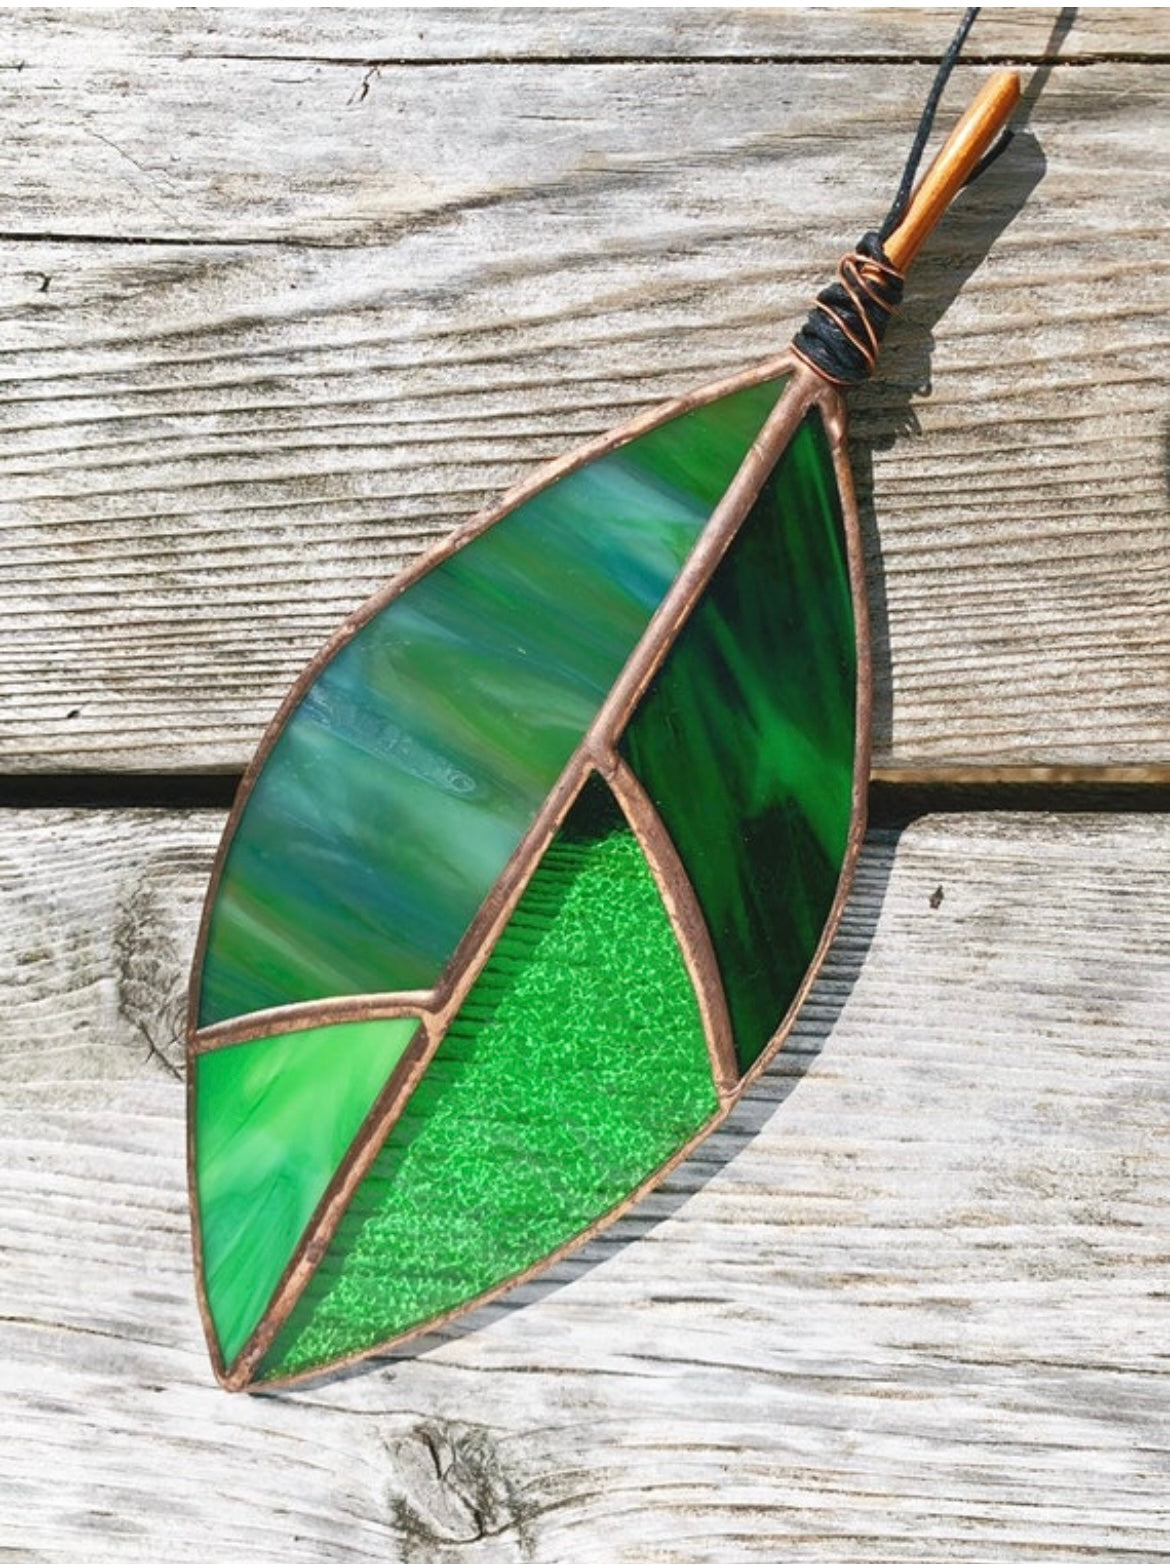 Beaverton Intro to Stained Glass Workshop at Moonflower's, Saturday March 2nd 10am-12pm